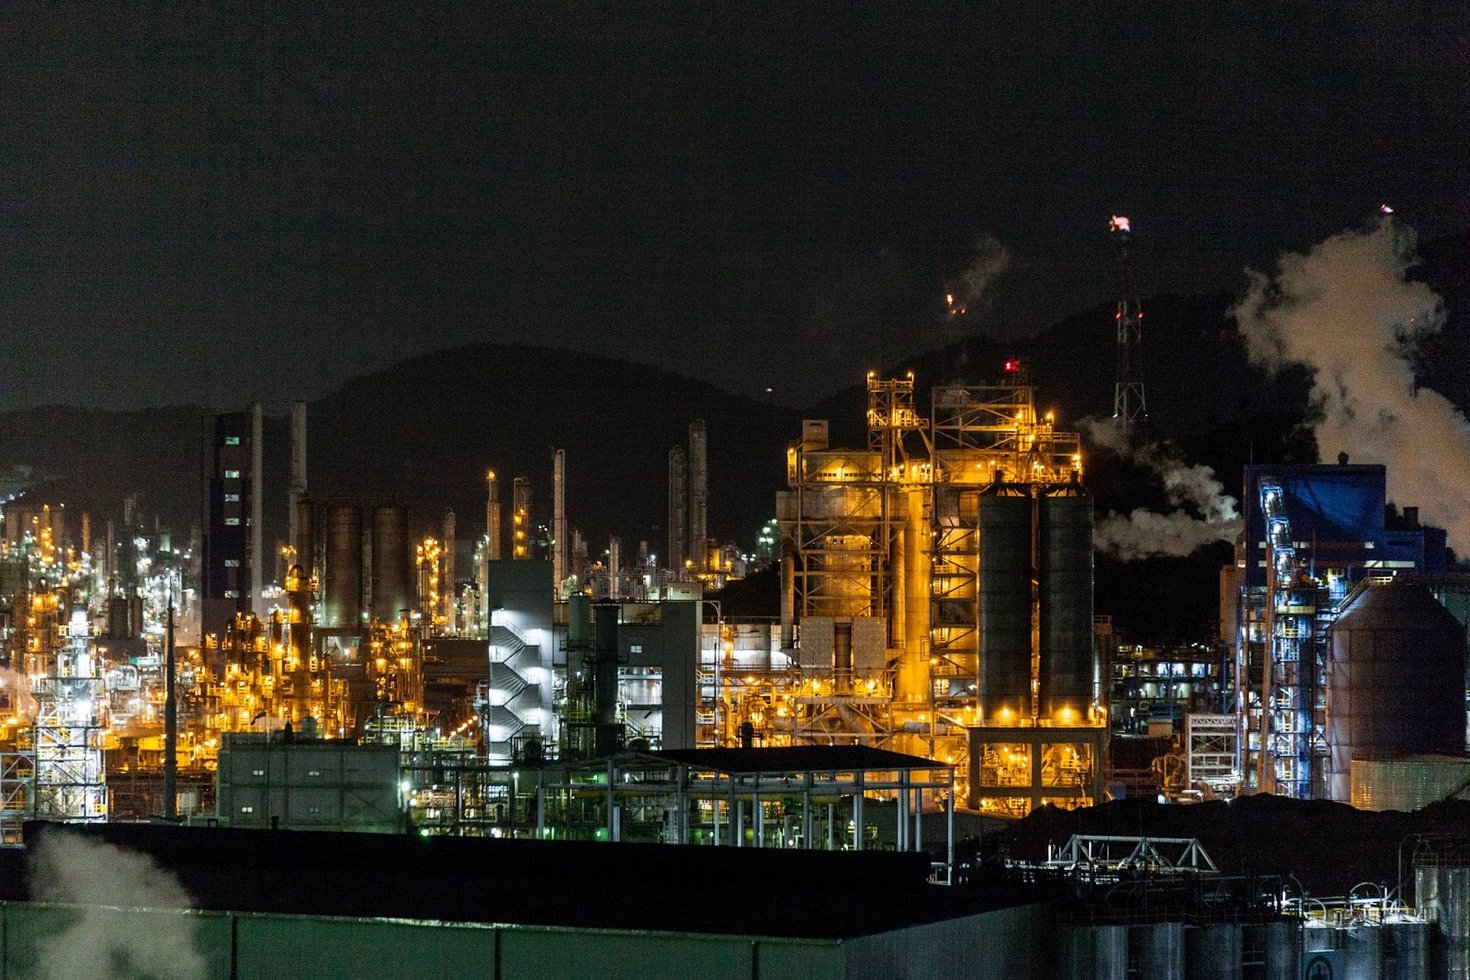 The illuminated smoke stacks, scaffolds, and silos of a chemical plant are viewed at night.